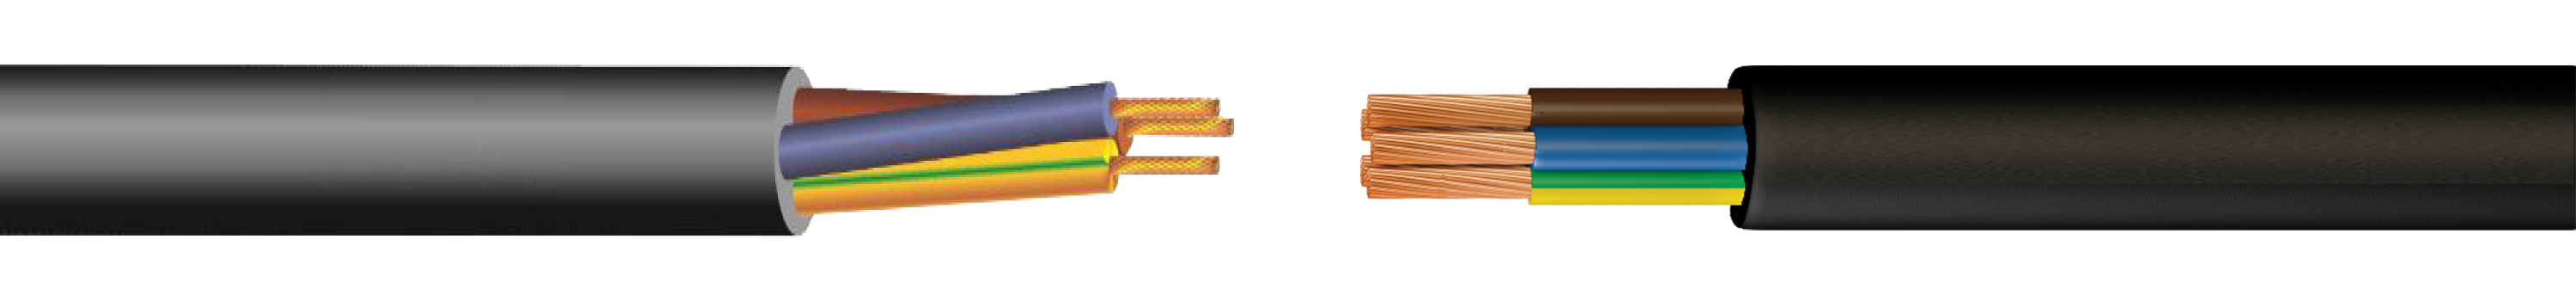 PCP-OR-EQUIVALENT-SYNTHETIC-ELASTOMER-SHEATHED-FLEXIBLE-CABLE-H07RN-F-H05RN-F